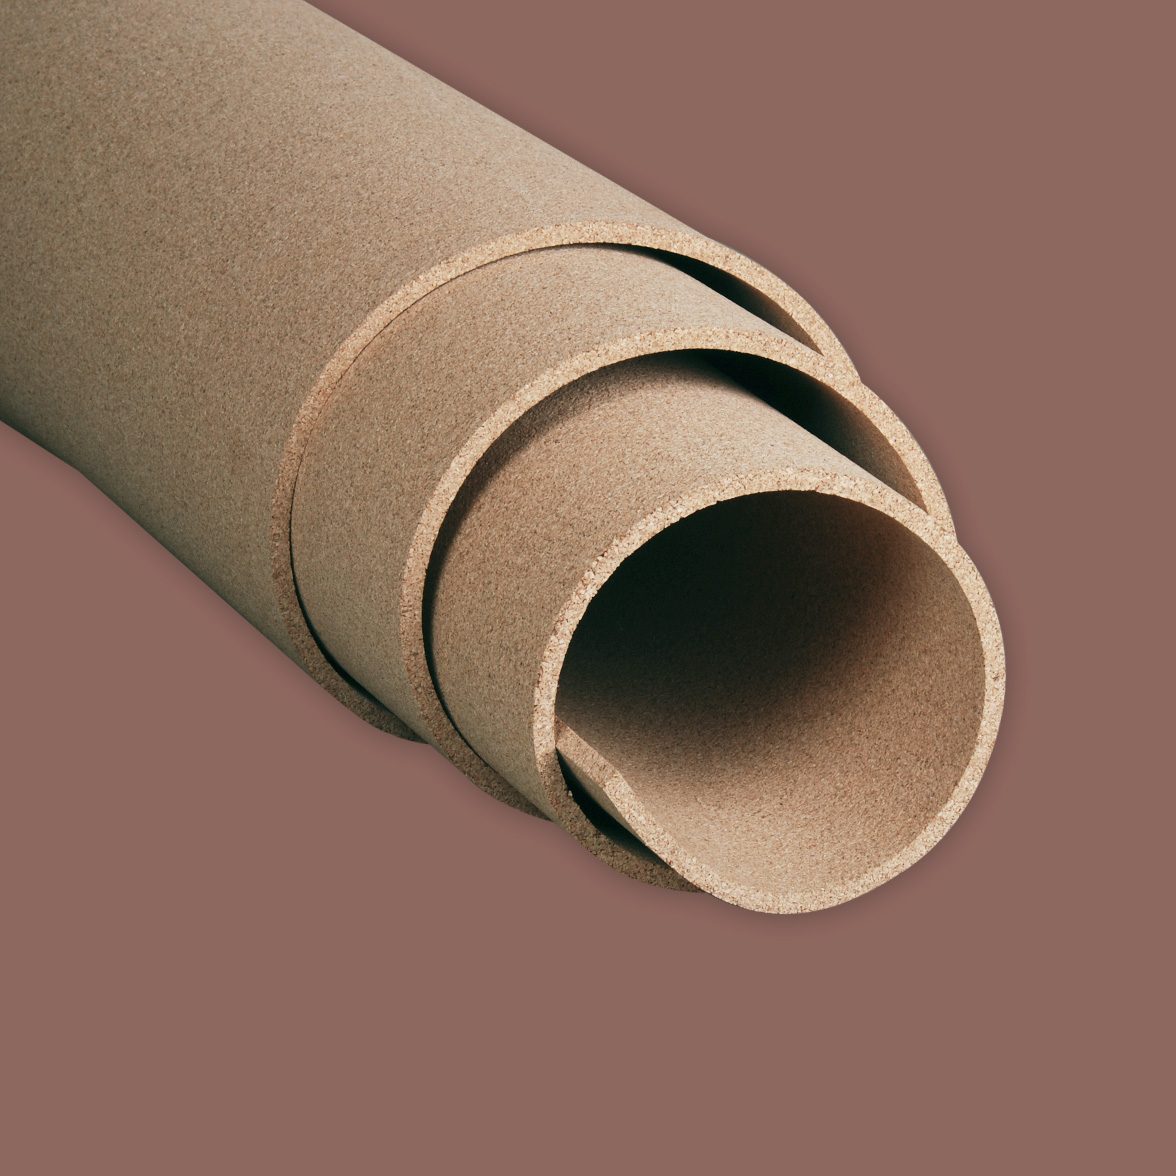 Proudly Made in USA by Manton Cork Natural Cork Roll 4' x 8' x 3/8" 438008-R 